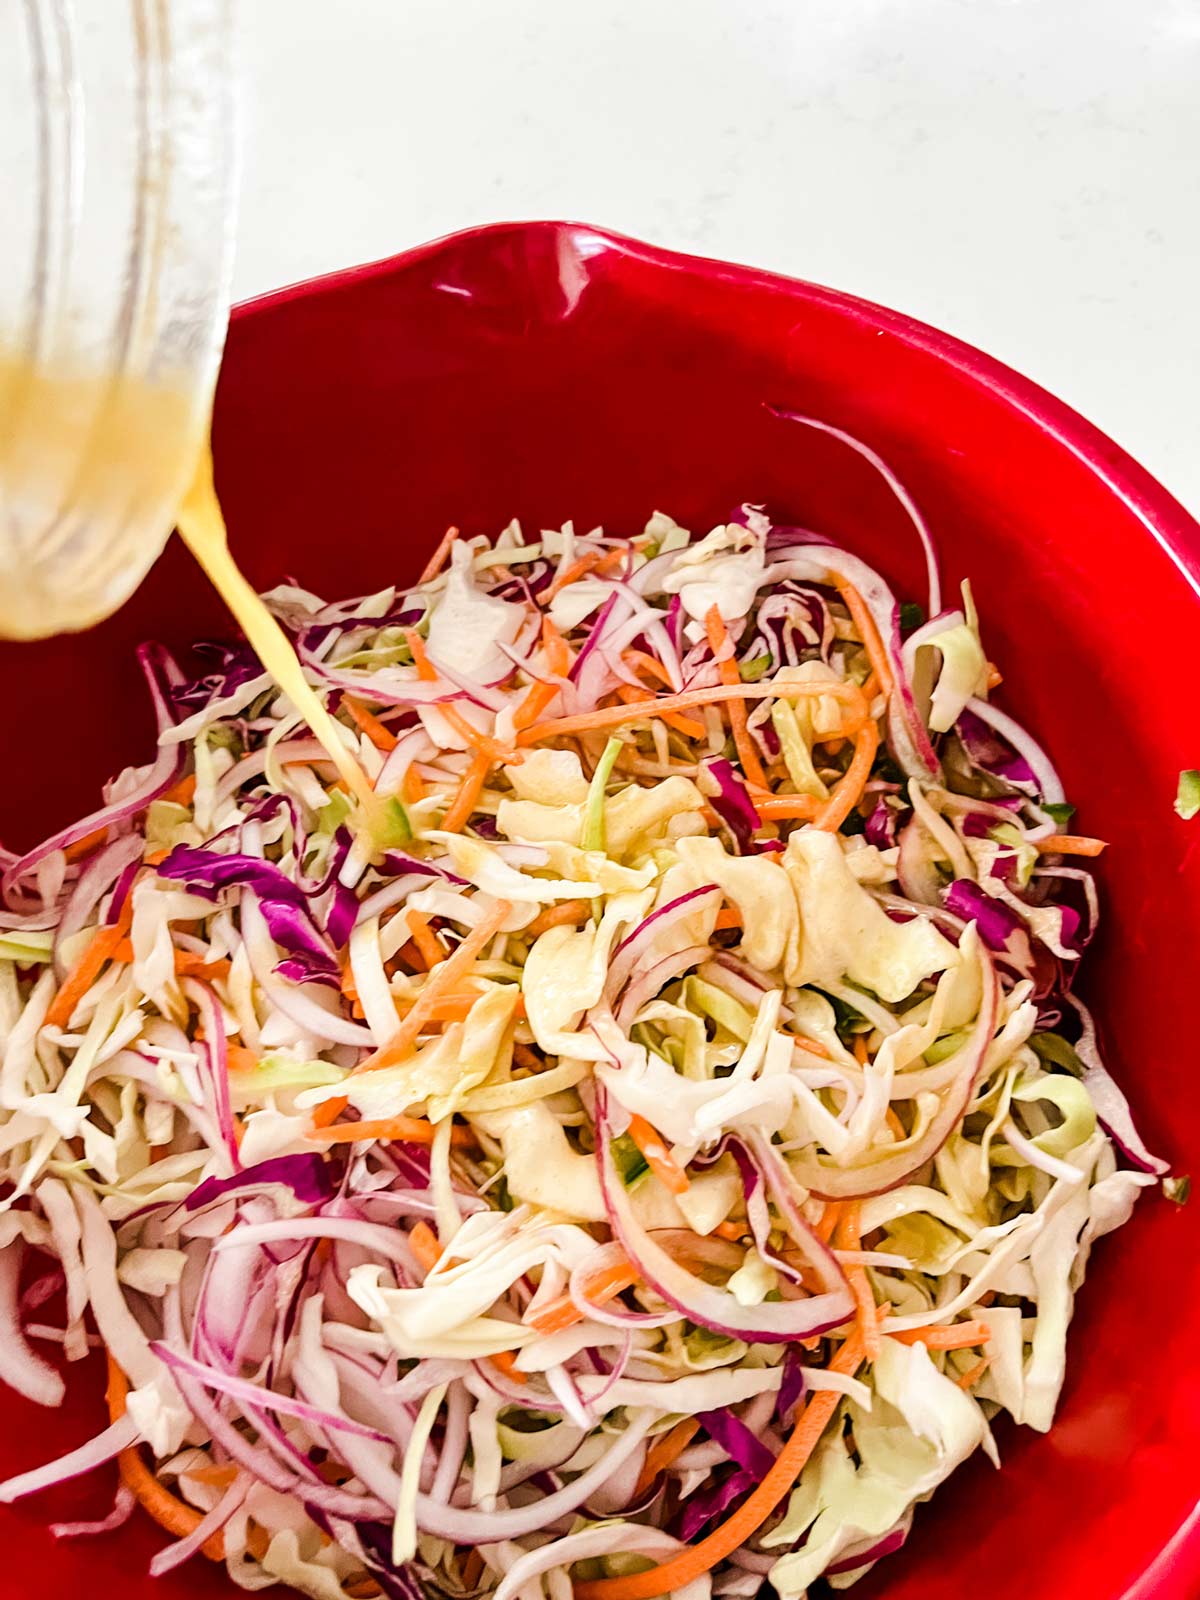 Slaw dressing being poured on top of Mexican slaw.